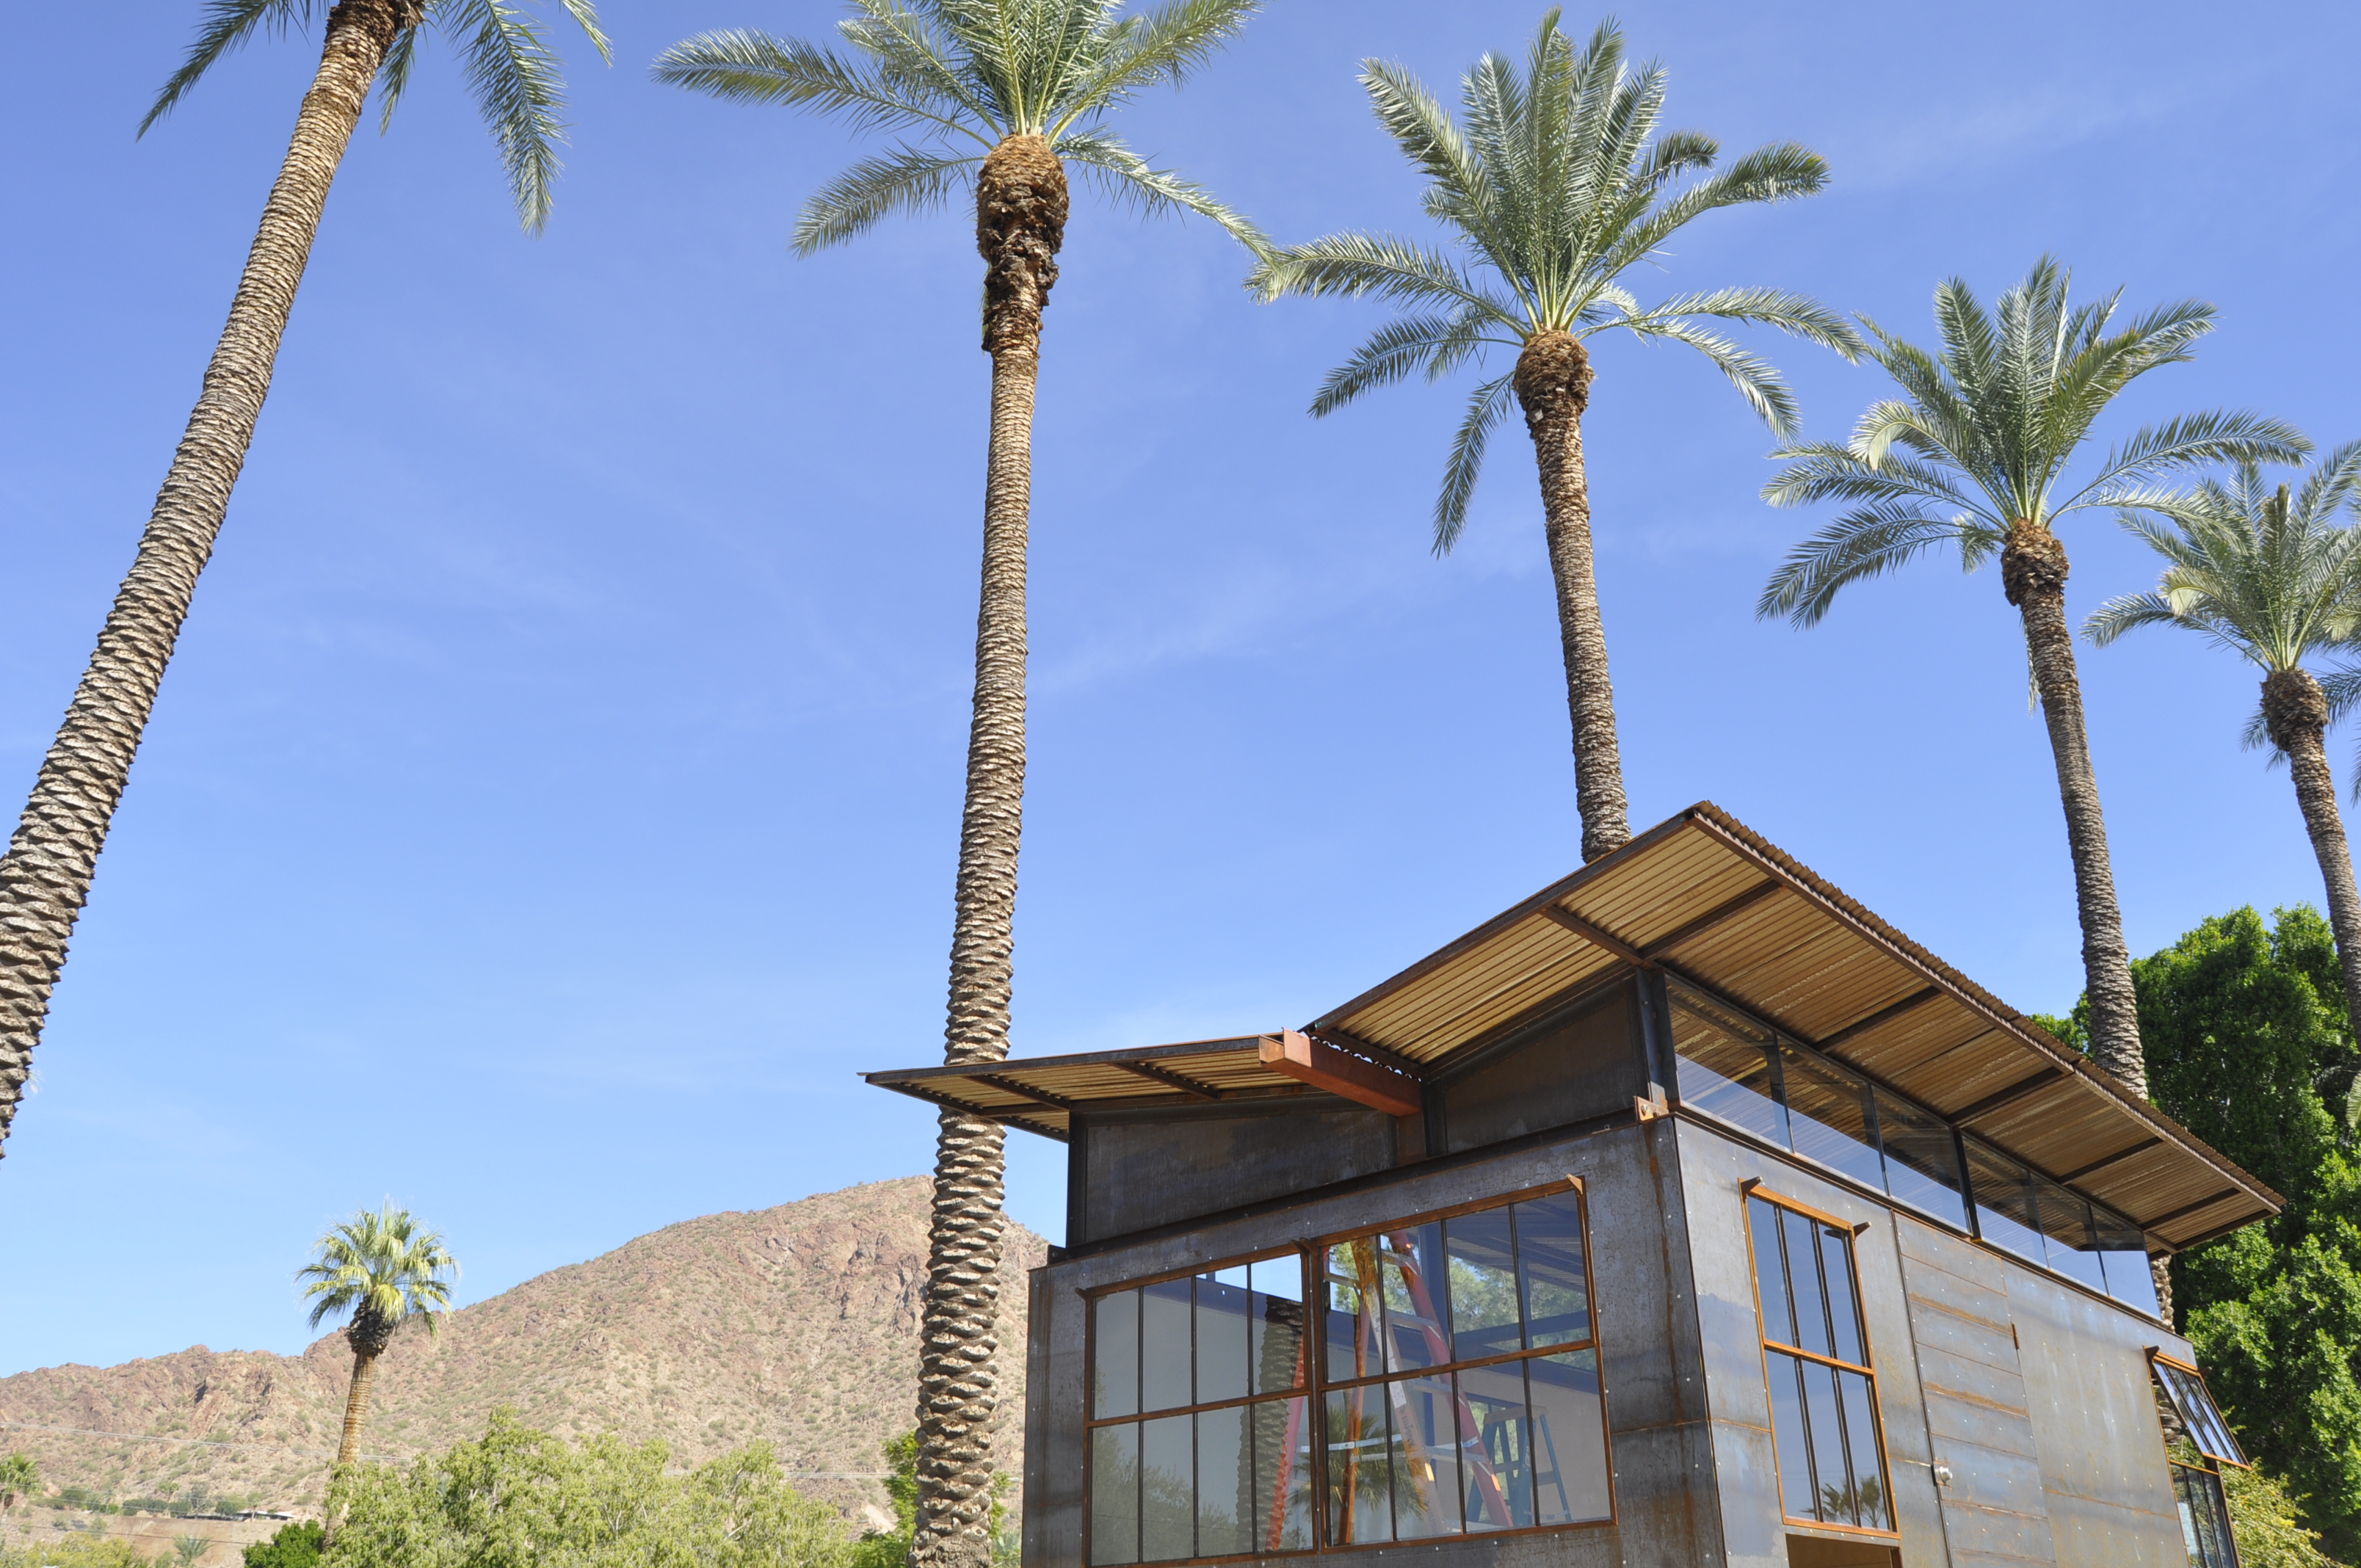 One of the dwellings taking shape against camelback mountain